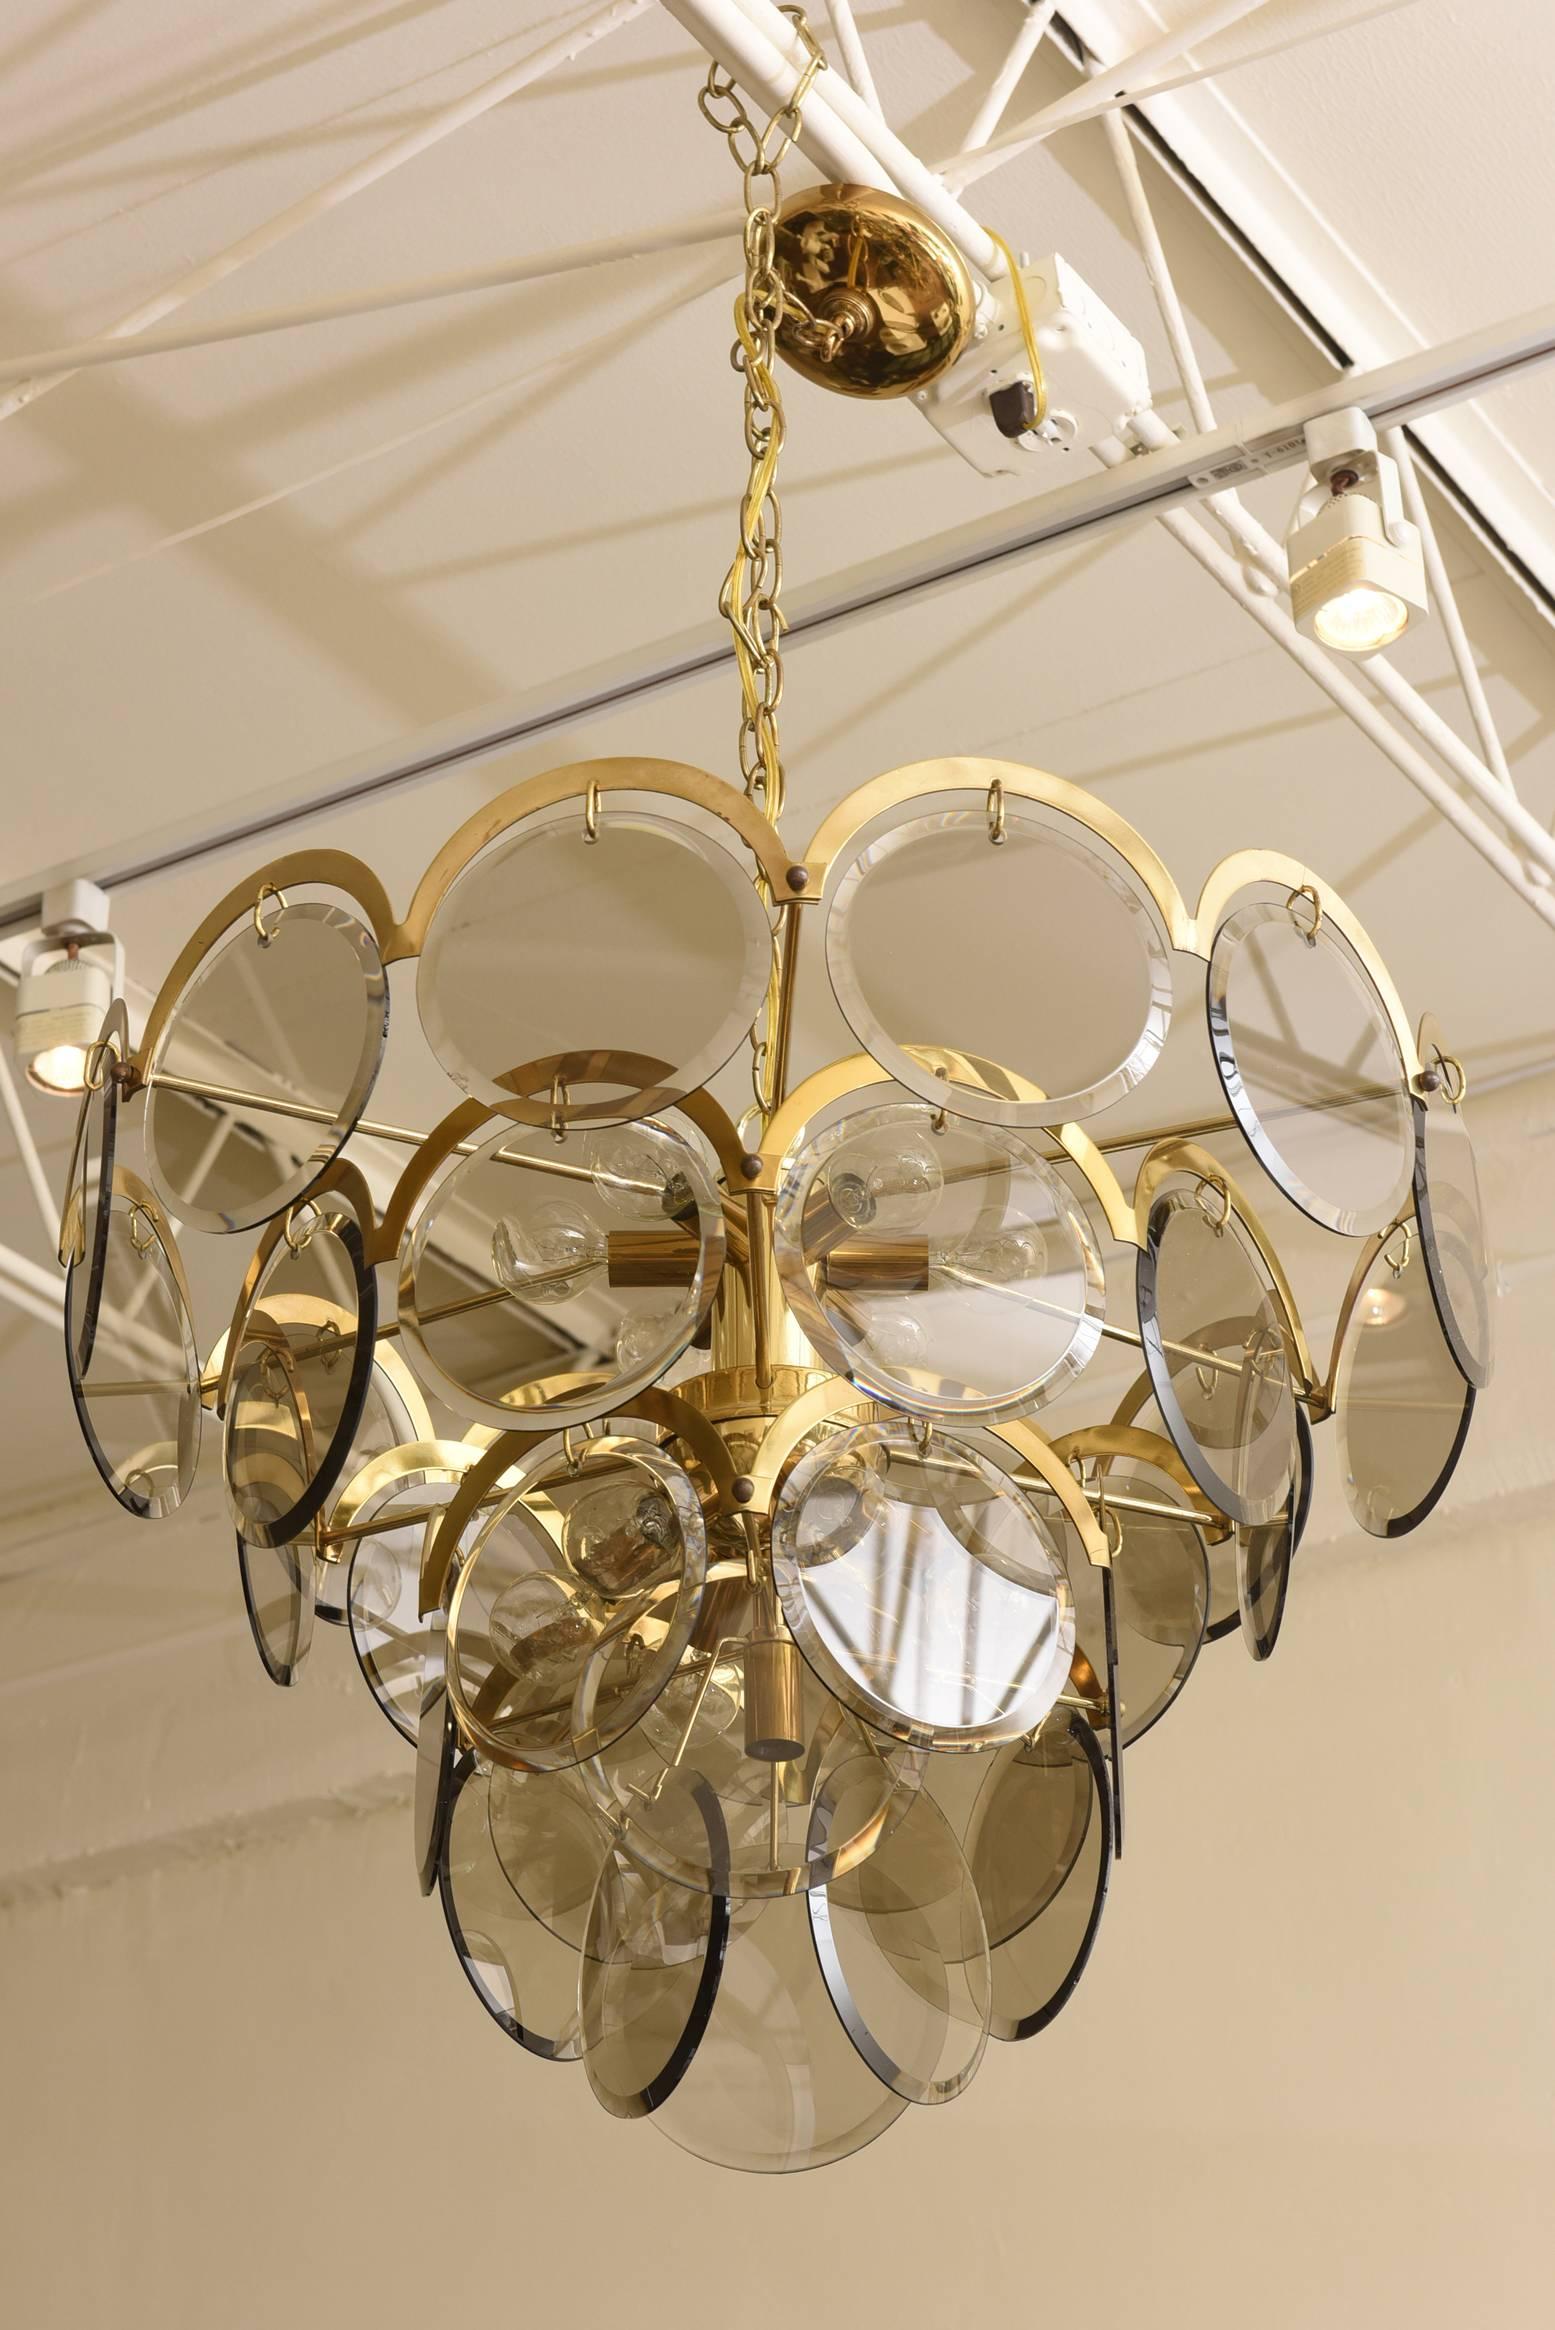 Four layers and four levels of this fantastic Italian Murano smoked gray glass beveled disks hang on this vintage Vistosi chandelier. Each glass disk is 6